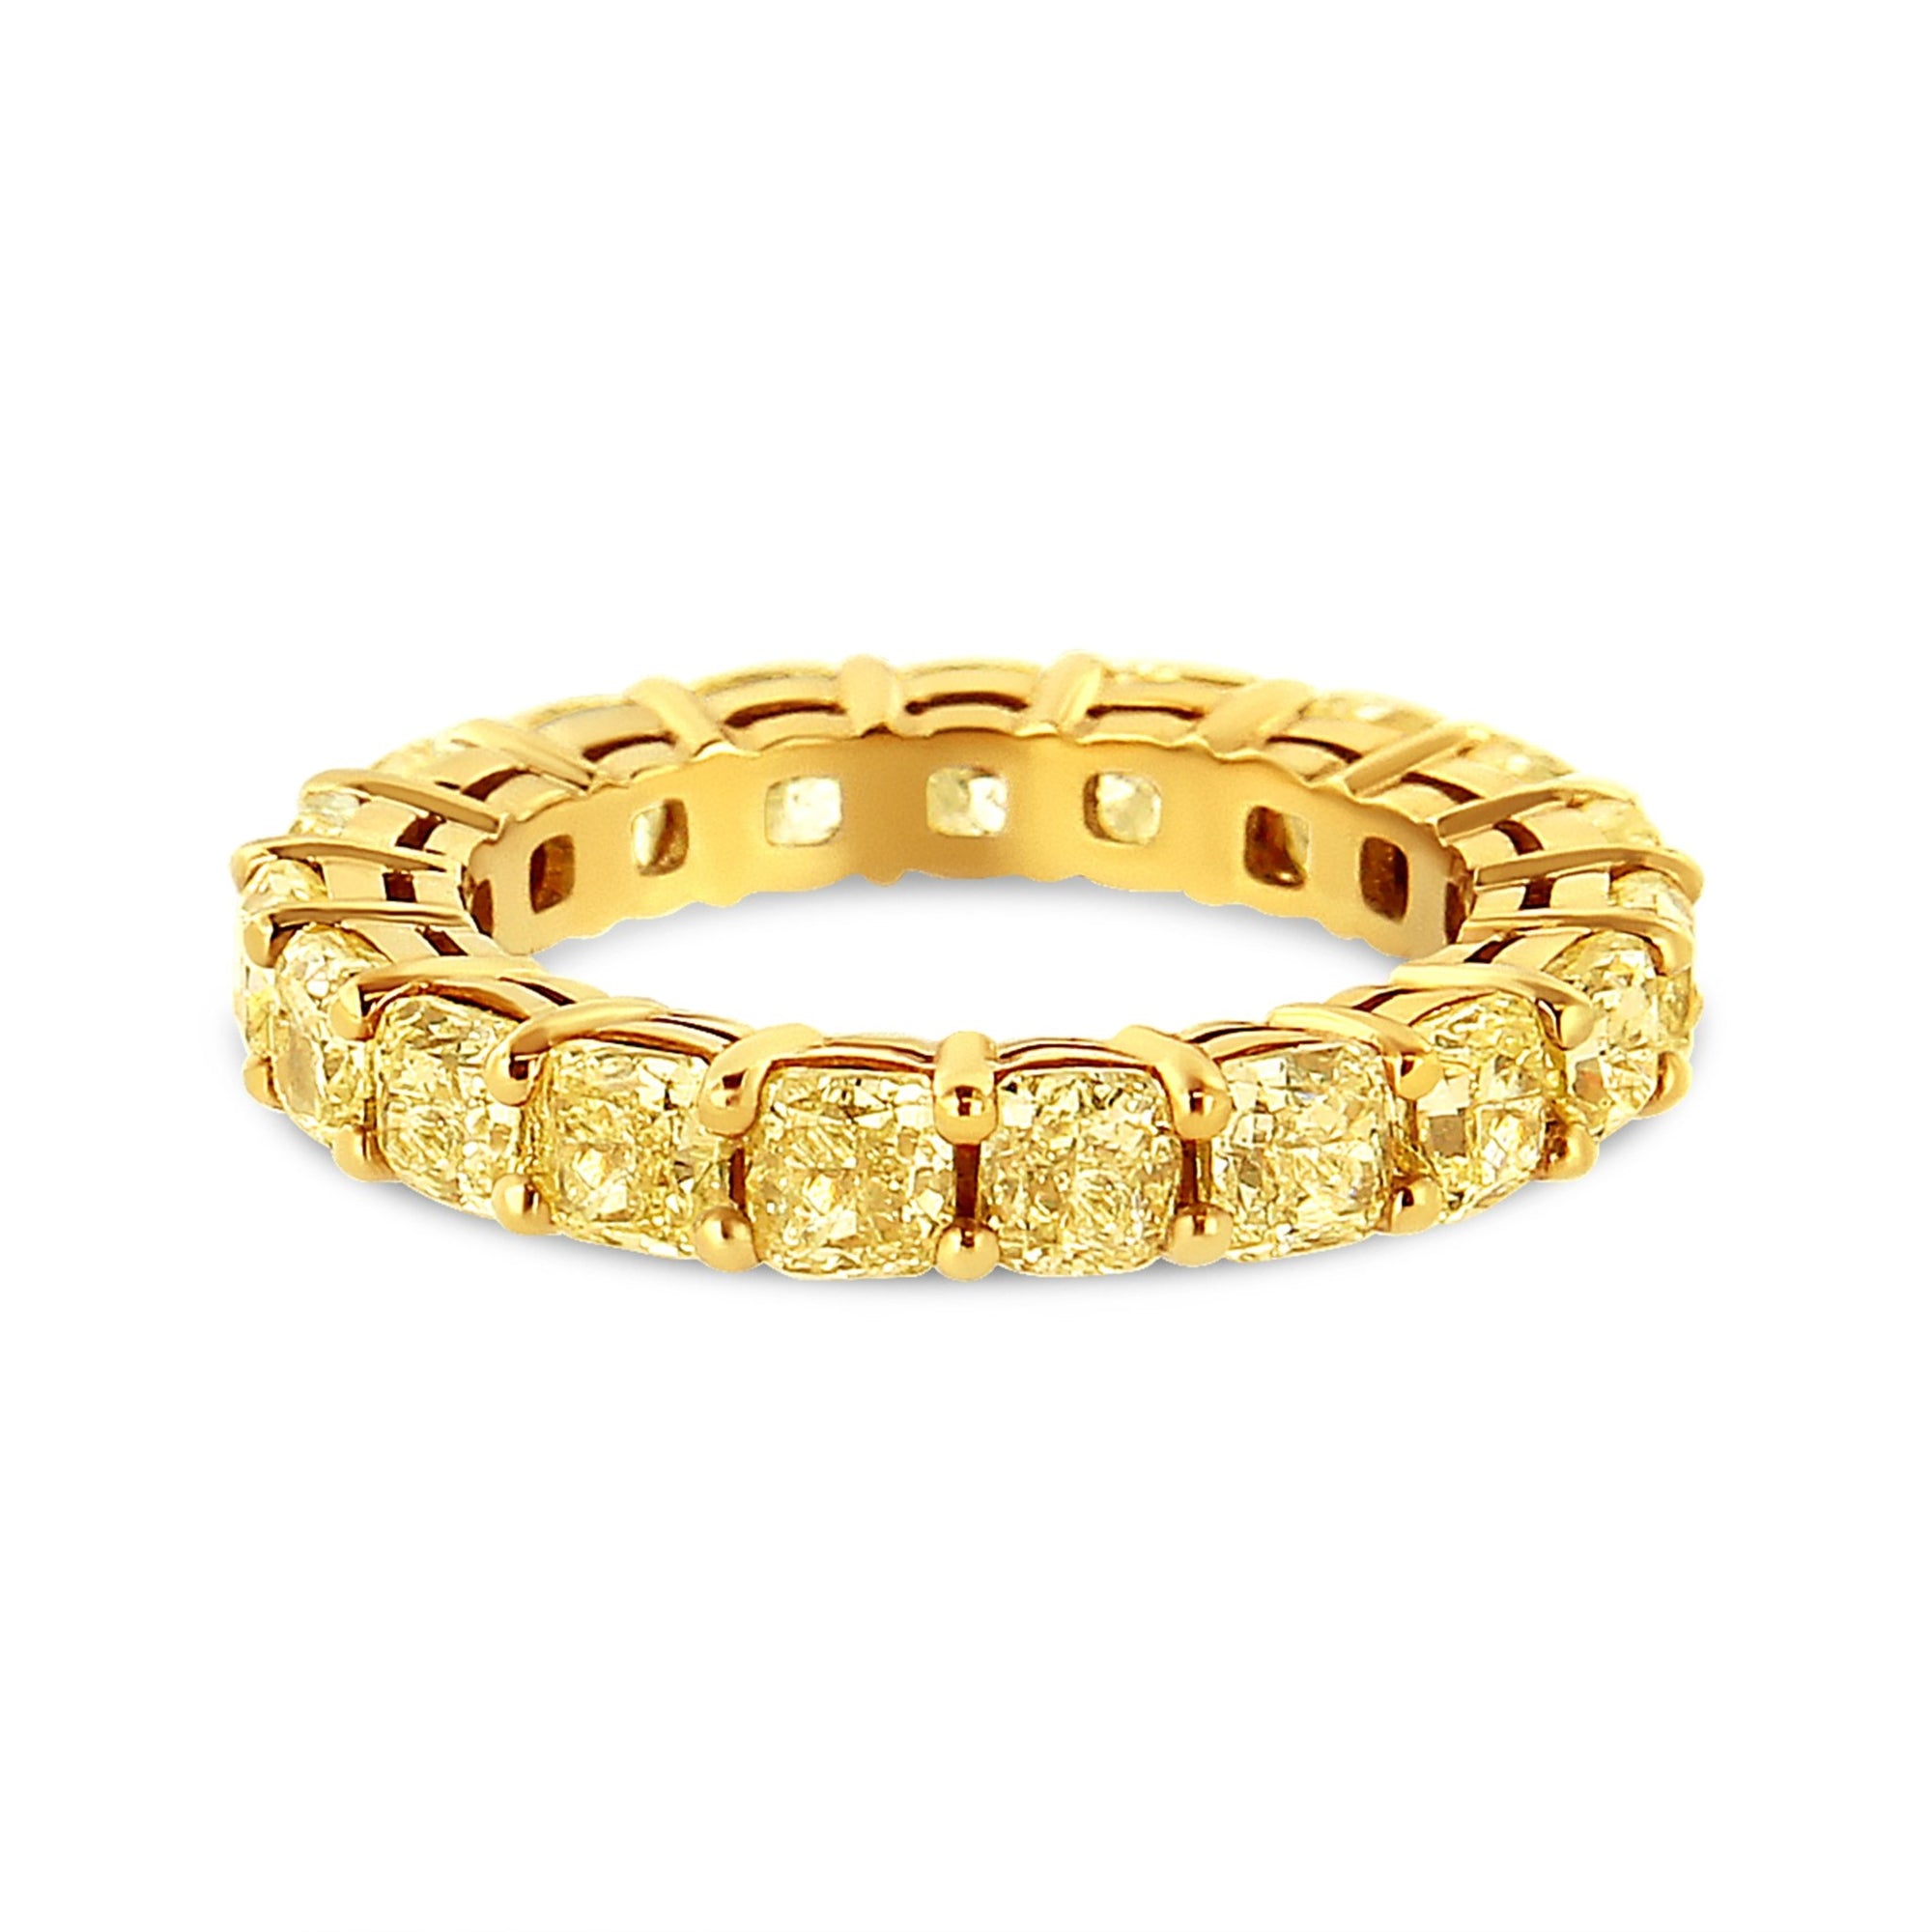 IGI Certified 18K Yellow Gold 5.0 Cttw Shared Prong Set Natural Fancy Yellow Cushion Diamond Eternity Band Ring (Yellow Color, VVS2-VS1 Clarity) - Ring Size 6 - LinkagejewelrydesignLinkagejewelrydesign